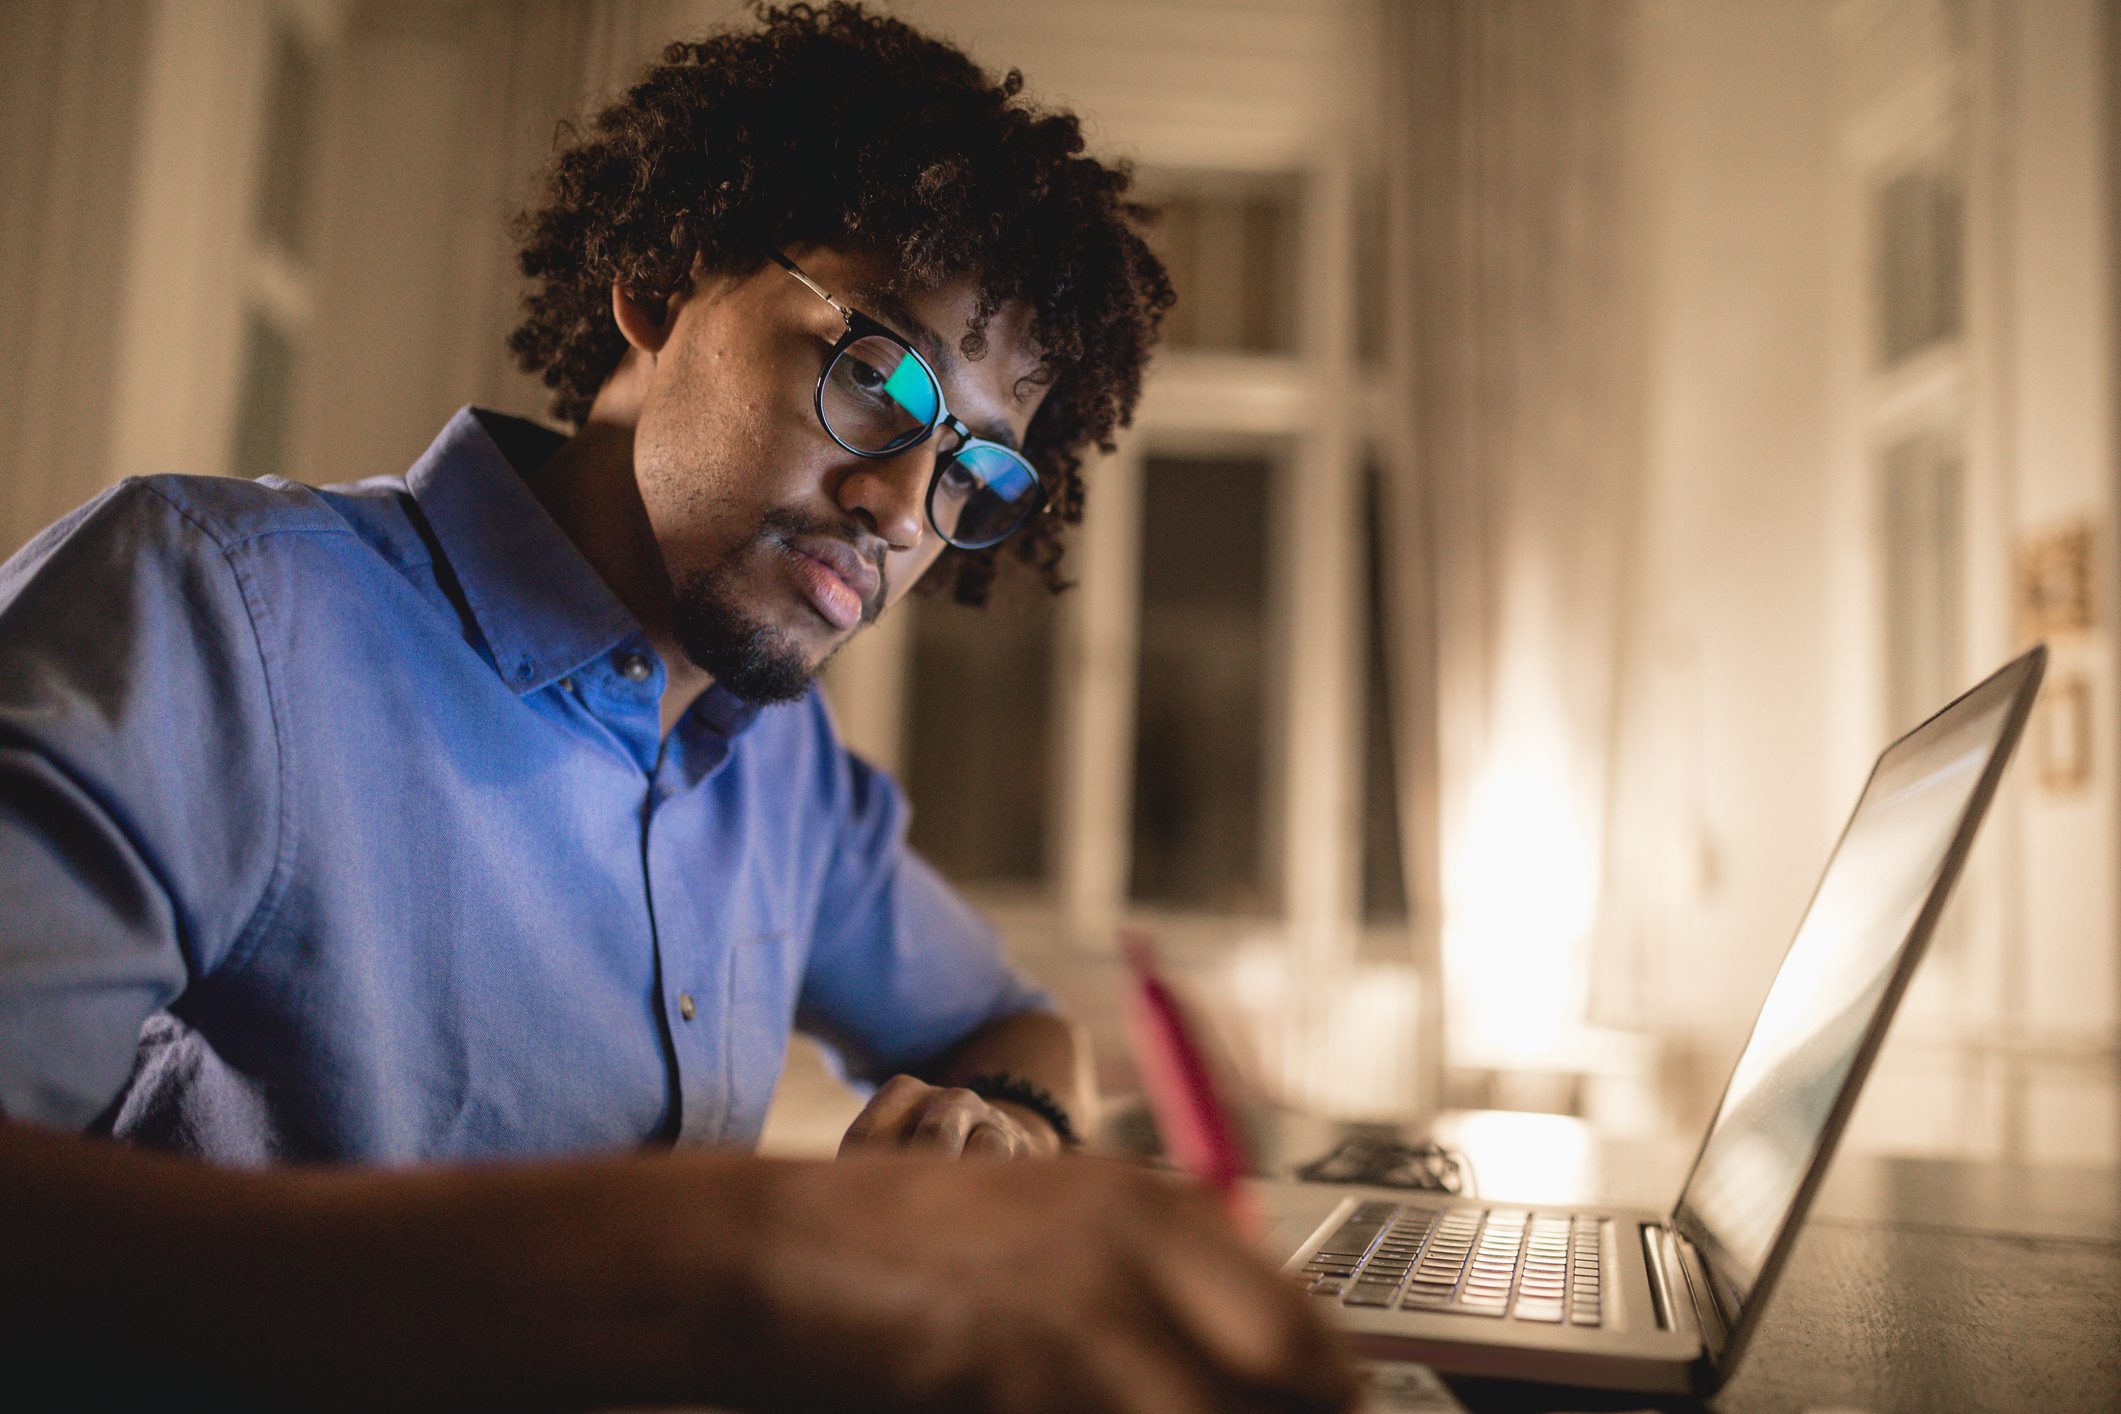 Young and determined black student studying at night at home, with a help of a laptop computer.